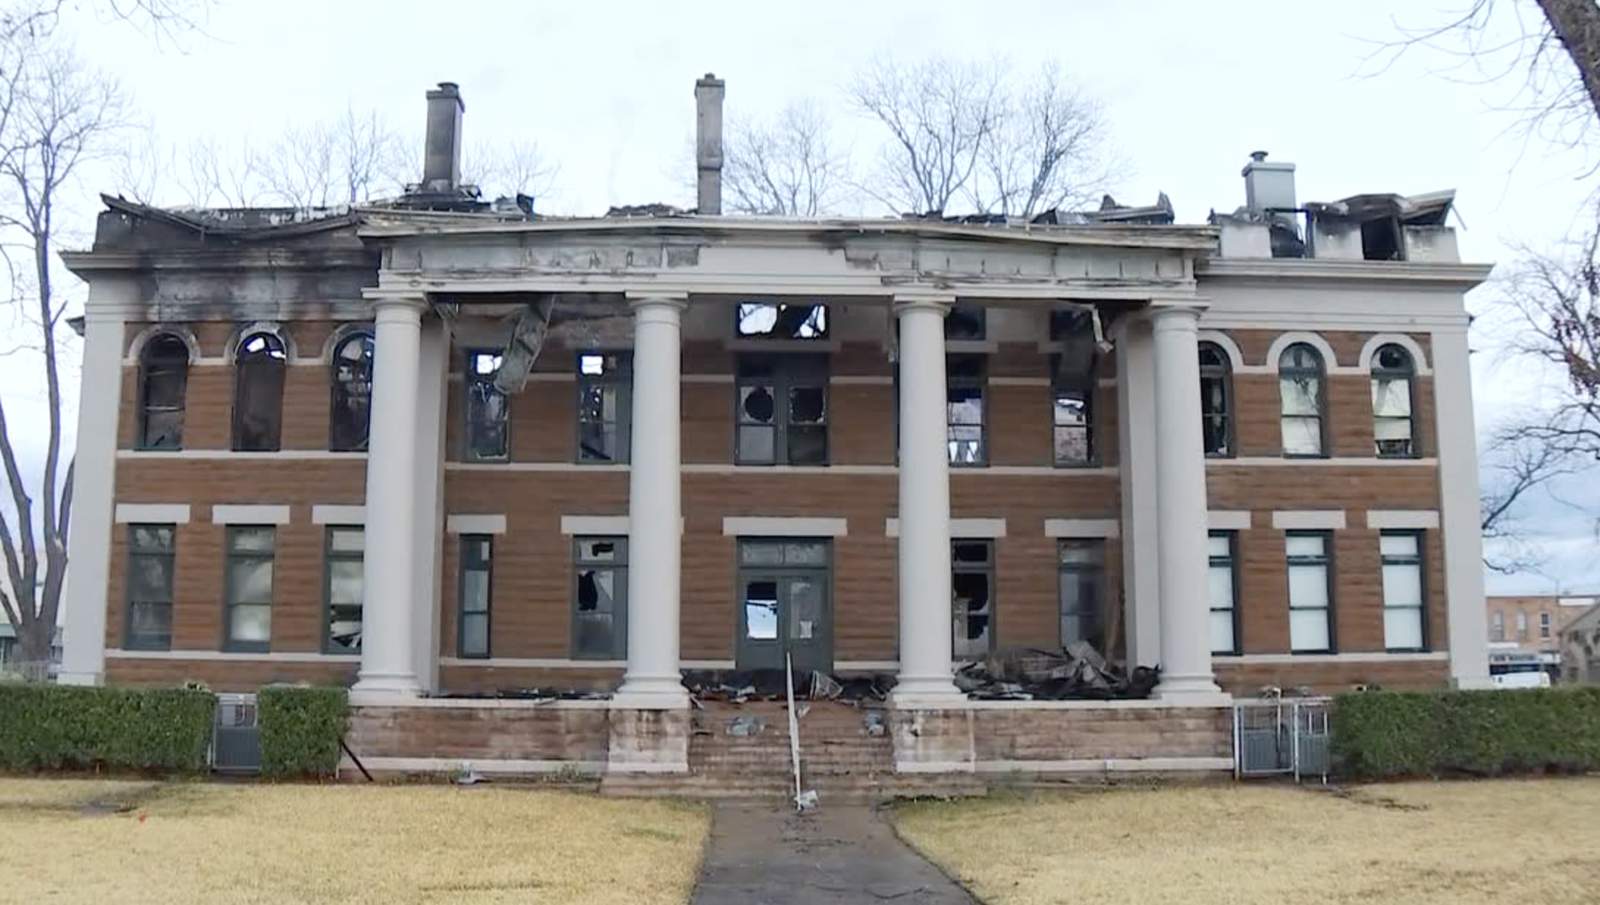 ‘Heartbroken’: Fire destroys 111-year-old Mason County courthouse ahead of renovation project